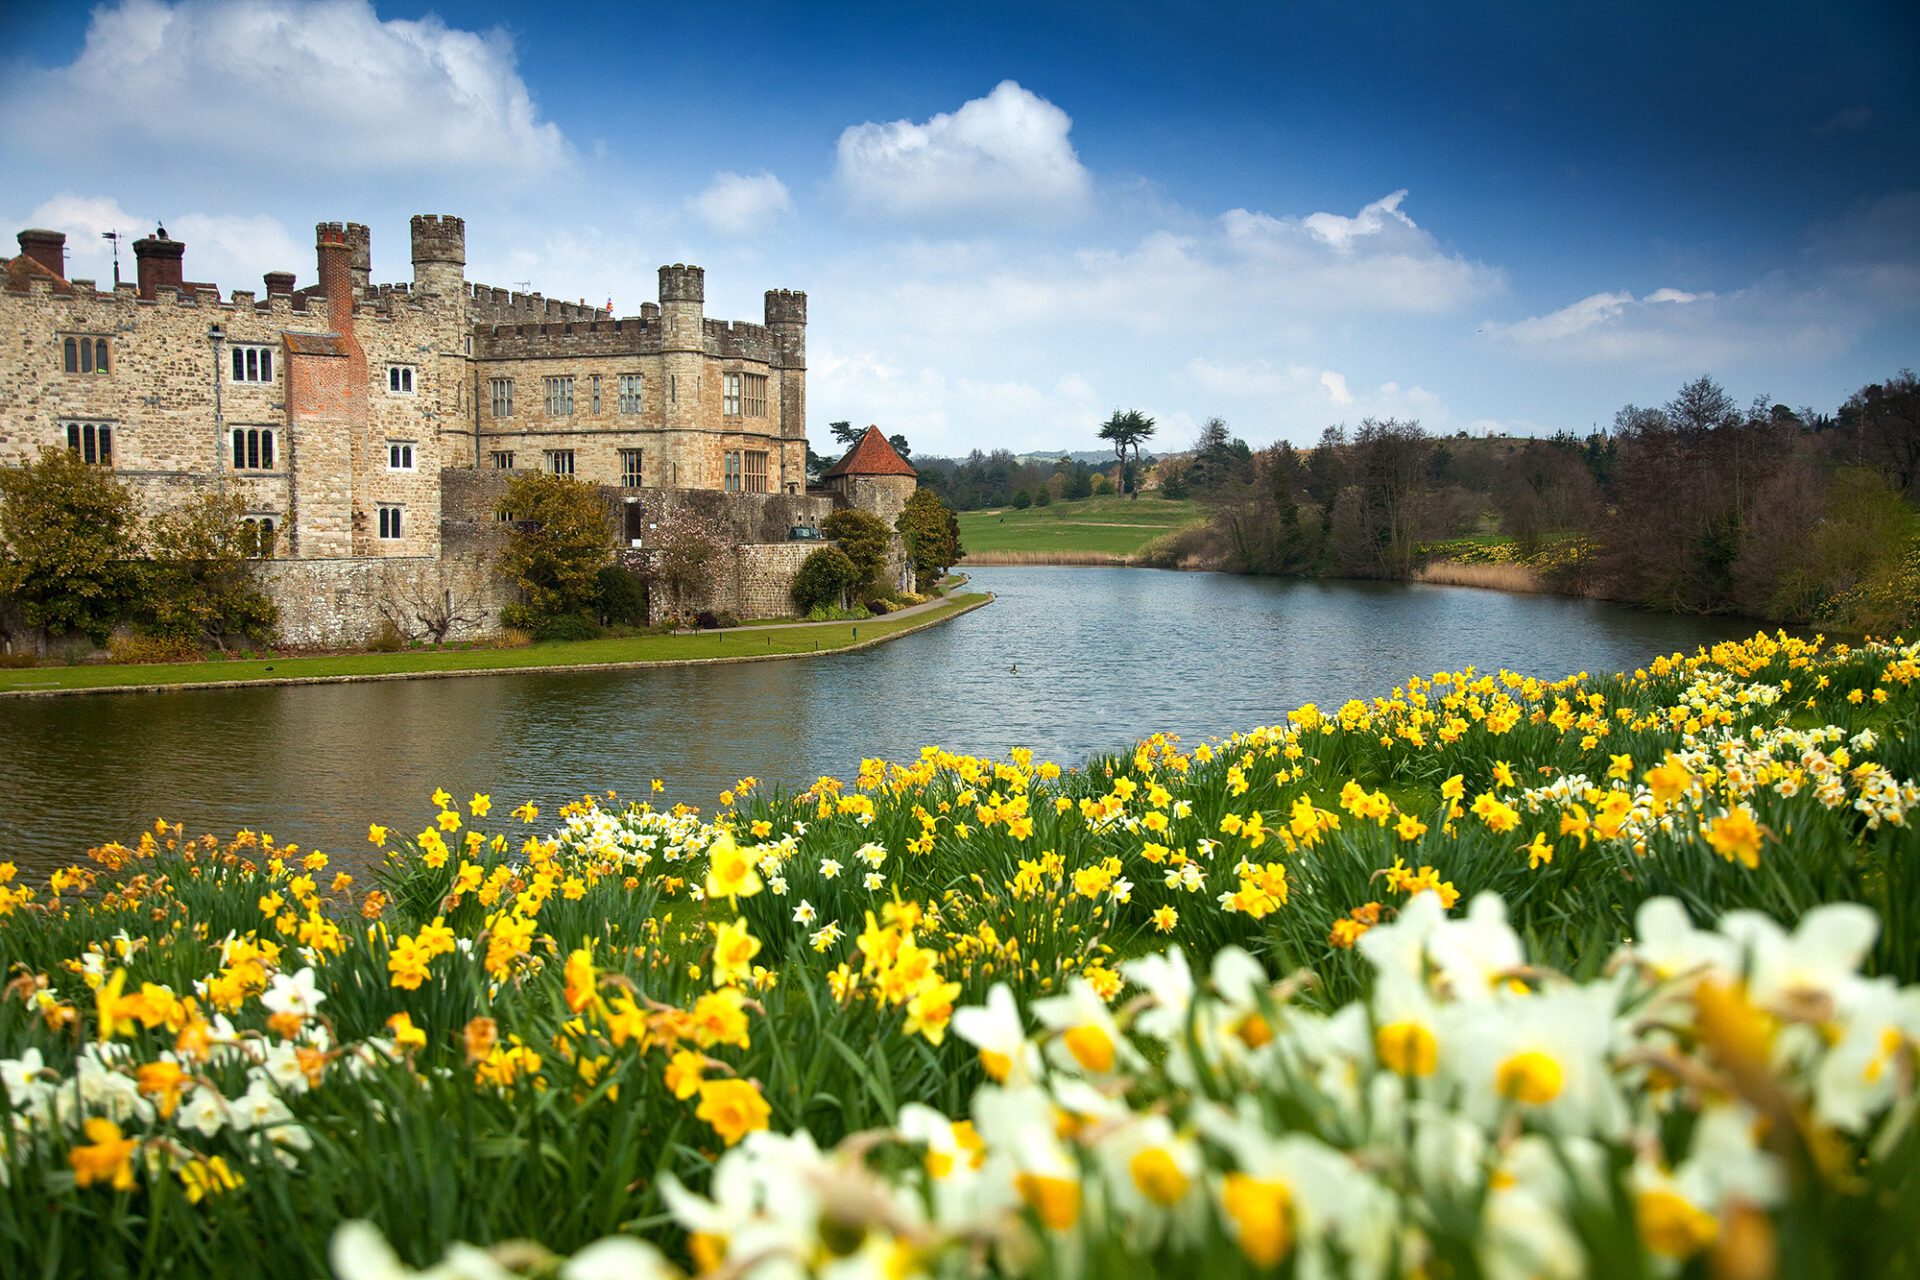 daffodils at leeds castle